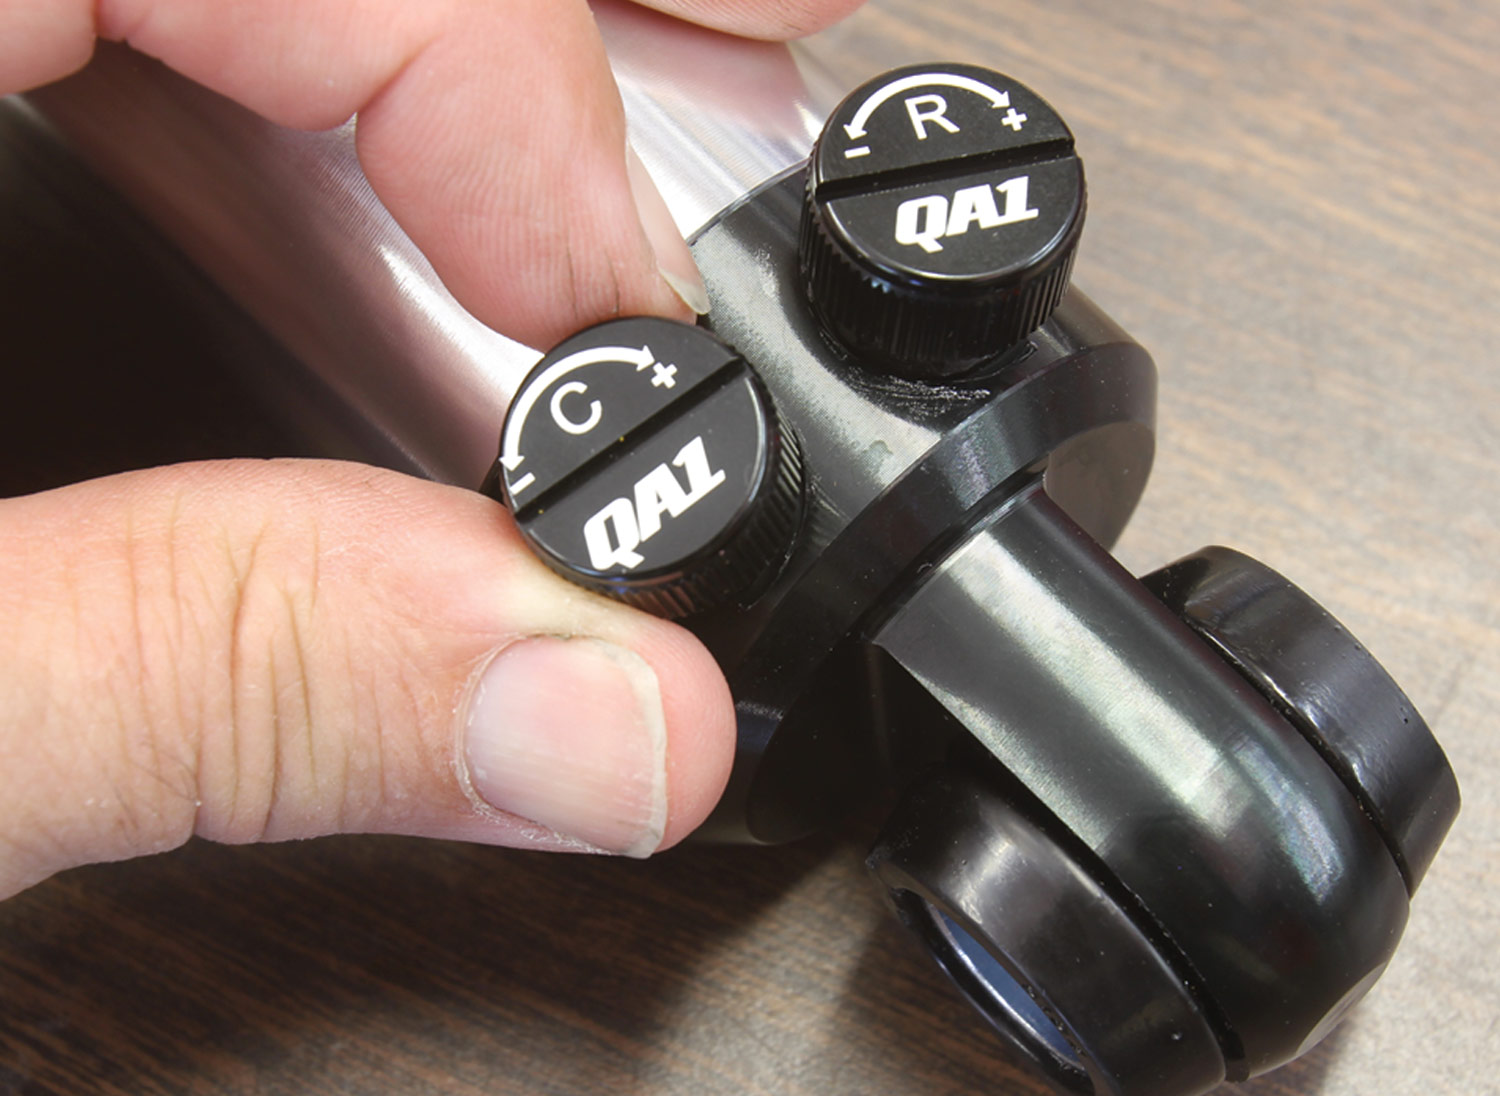 close view of two knobs, labeled "C" and "R" at the base of a shock, a hand turns the "C" labeled knob